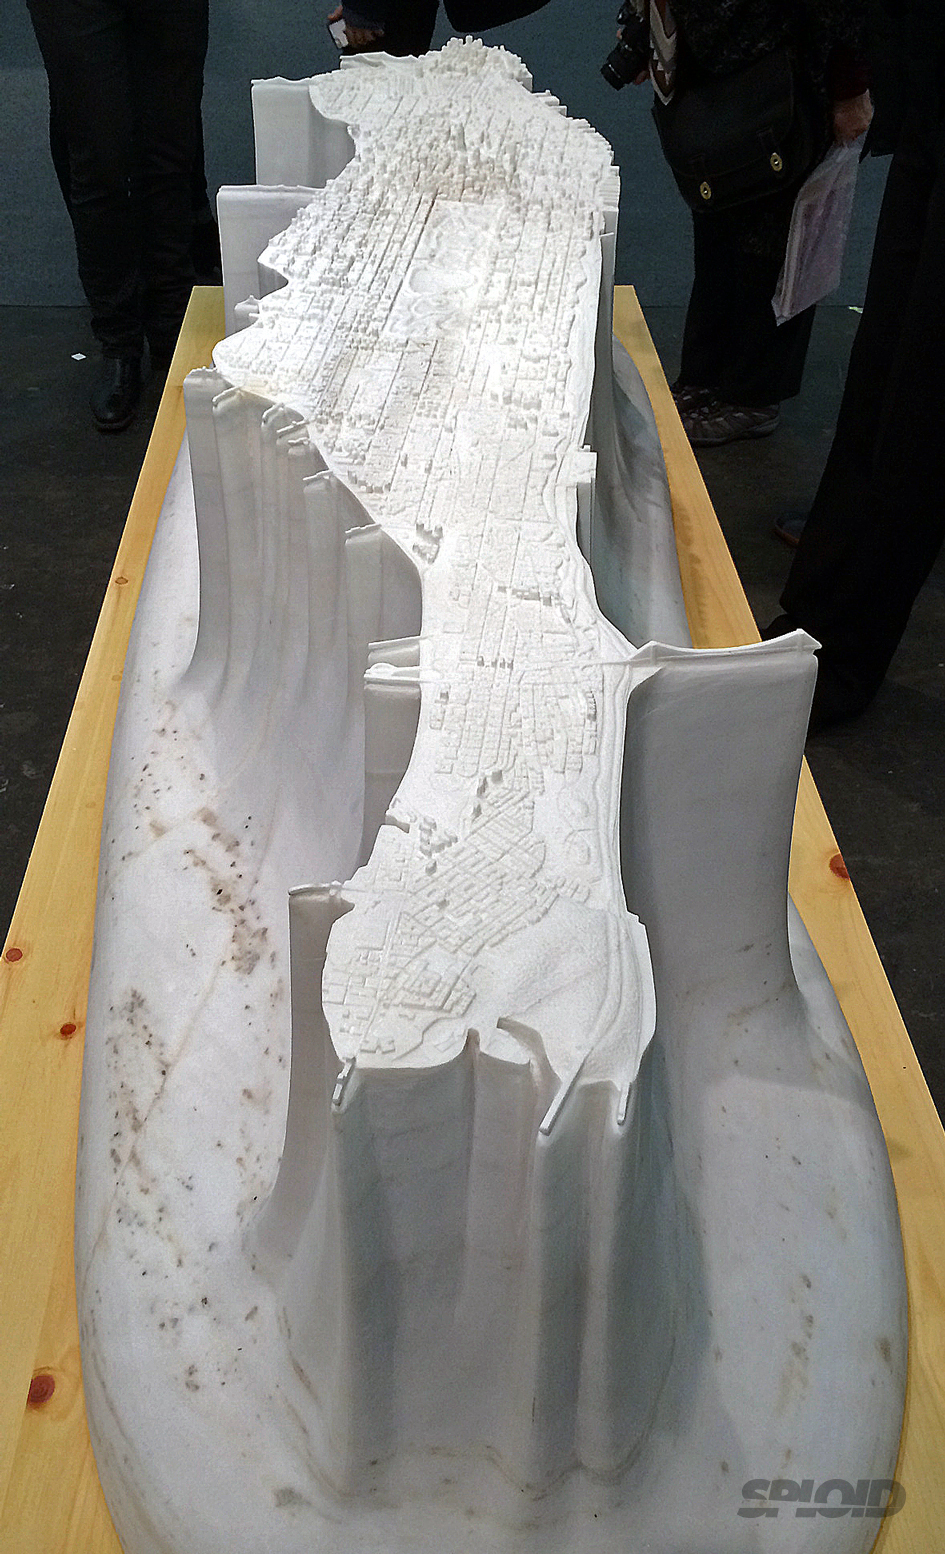 This Manhattan Model Carved In Marble Is So Damn Awesome